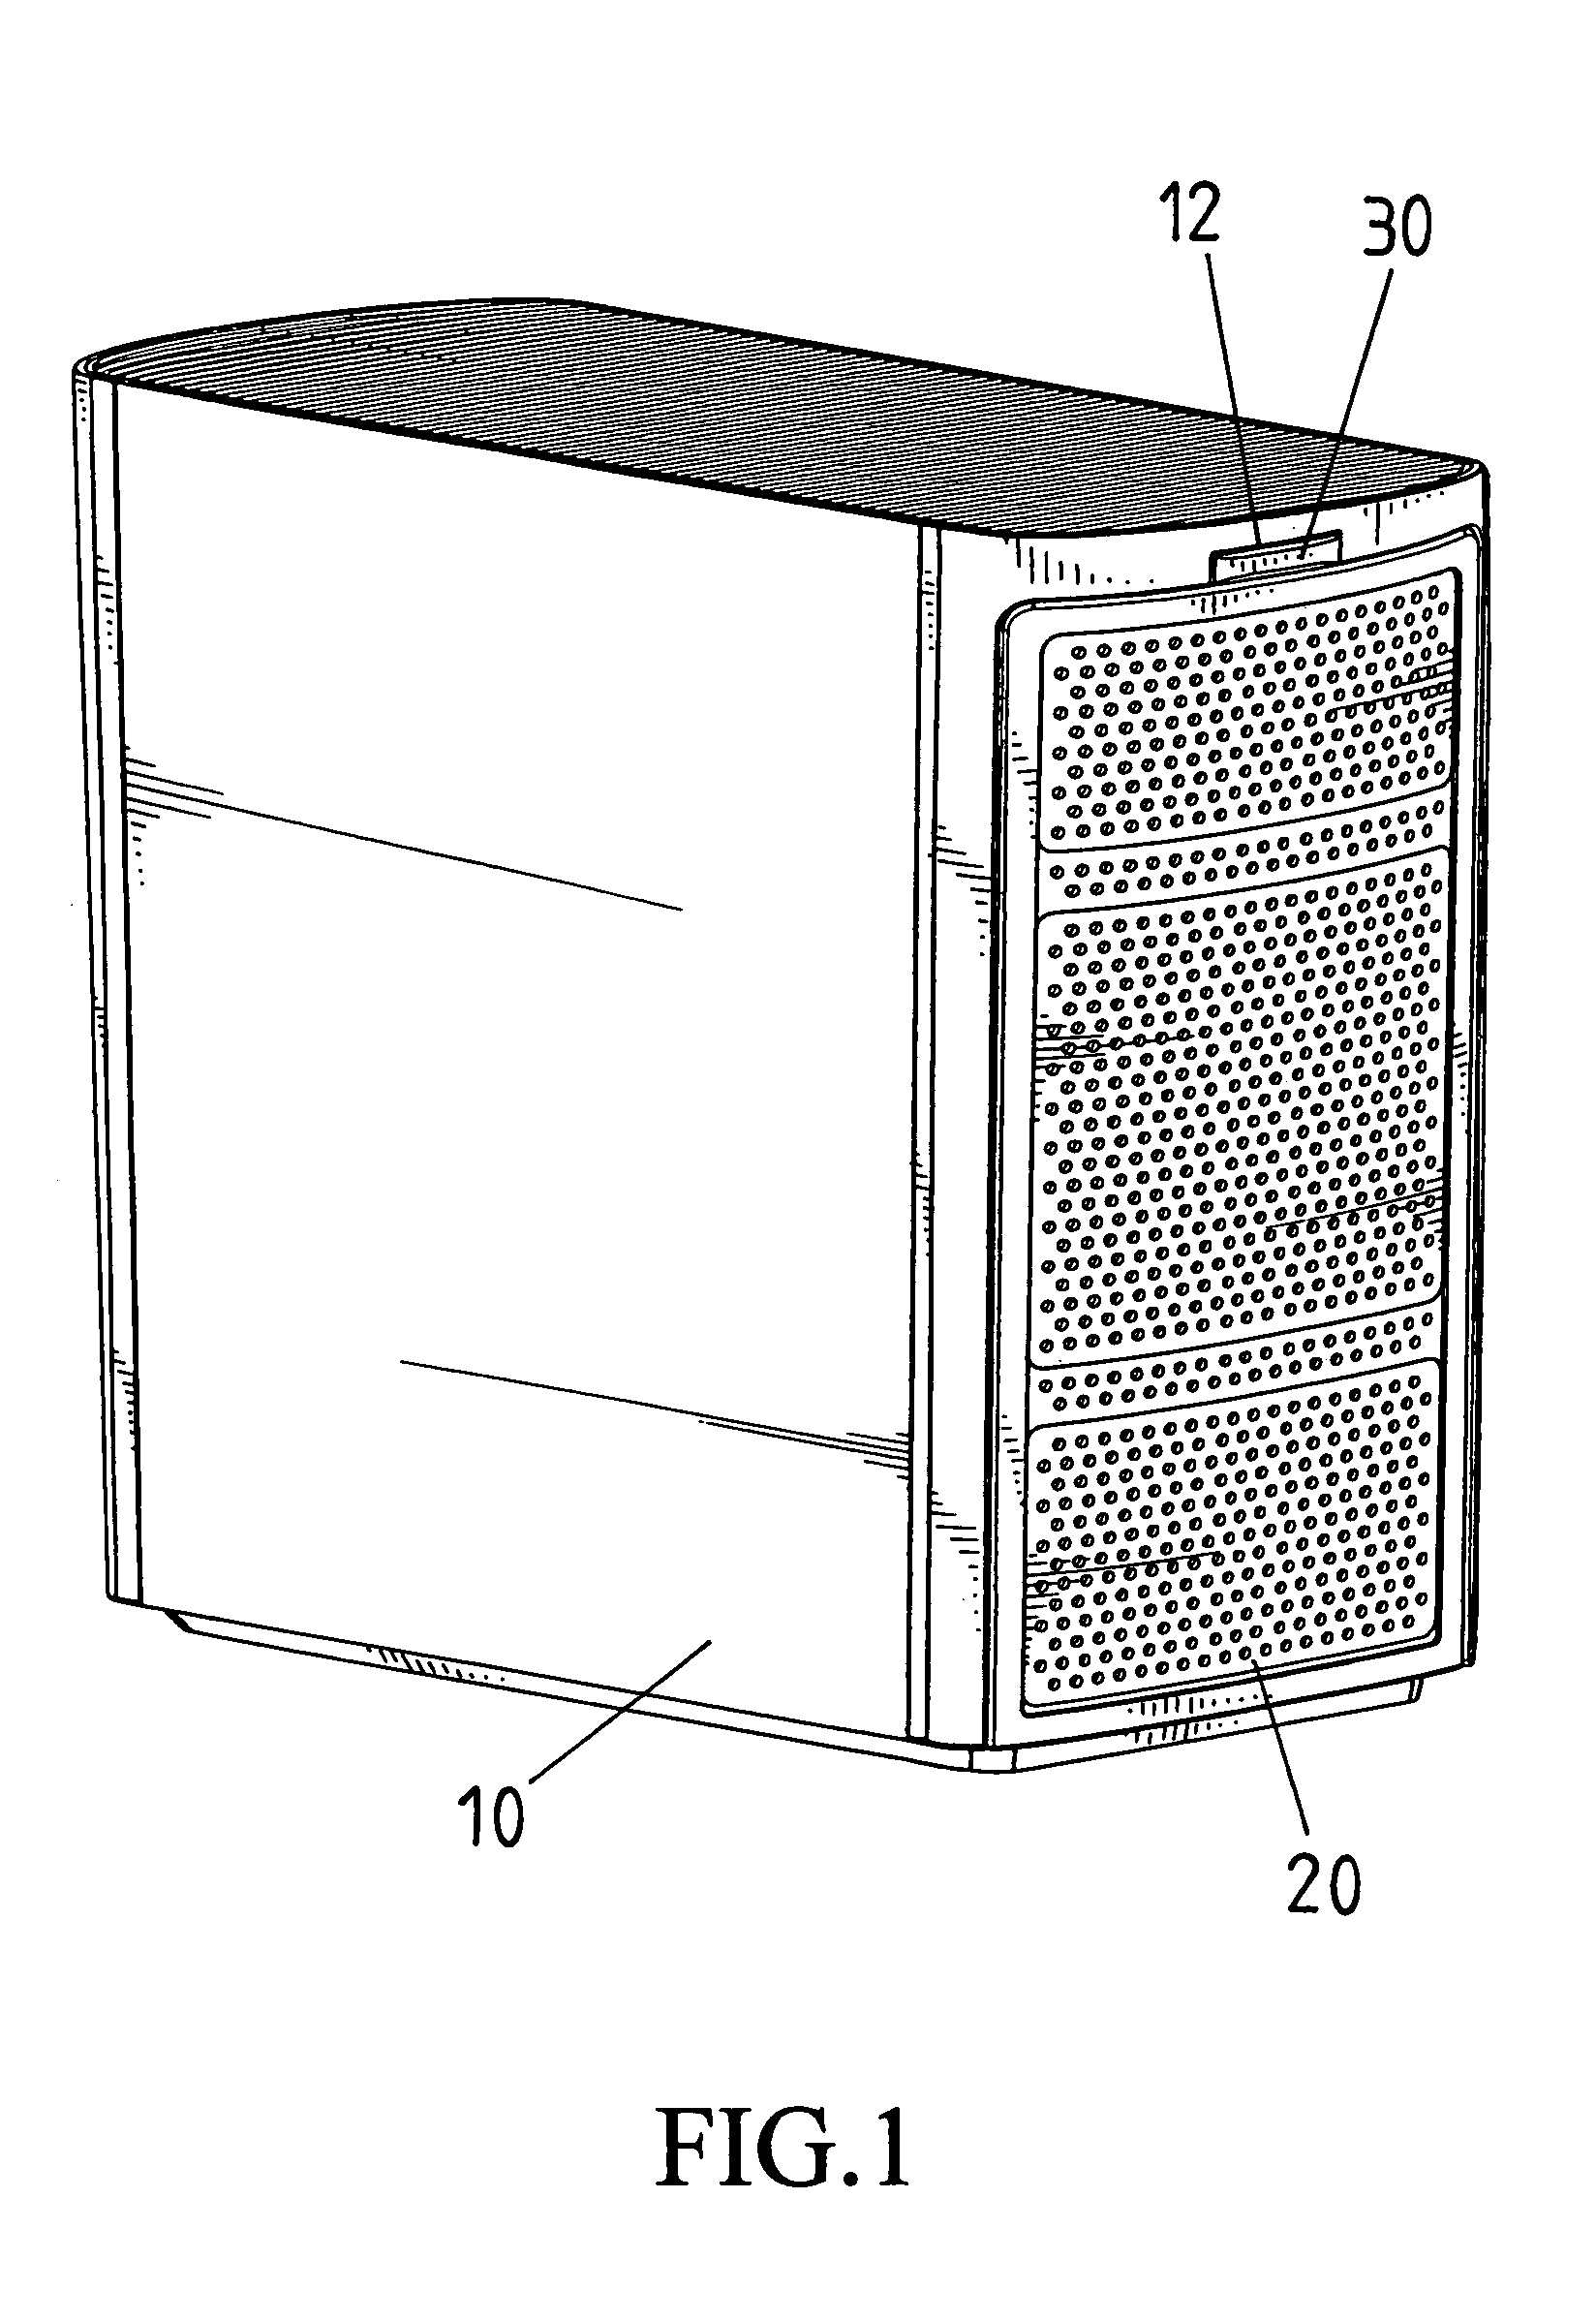 Computer back panel which can be quickly assembled or disassembled